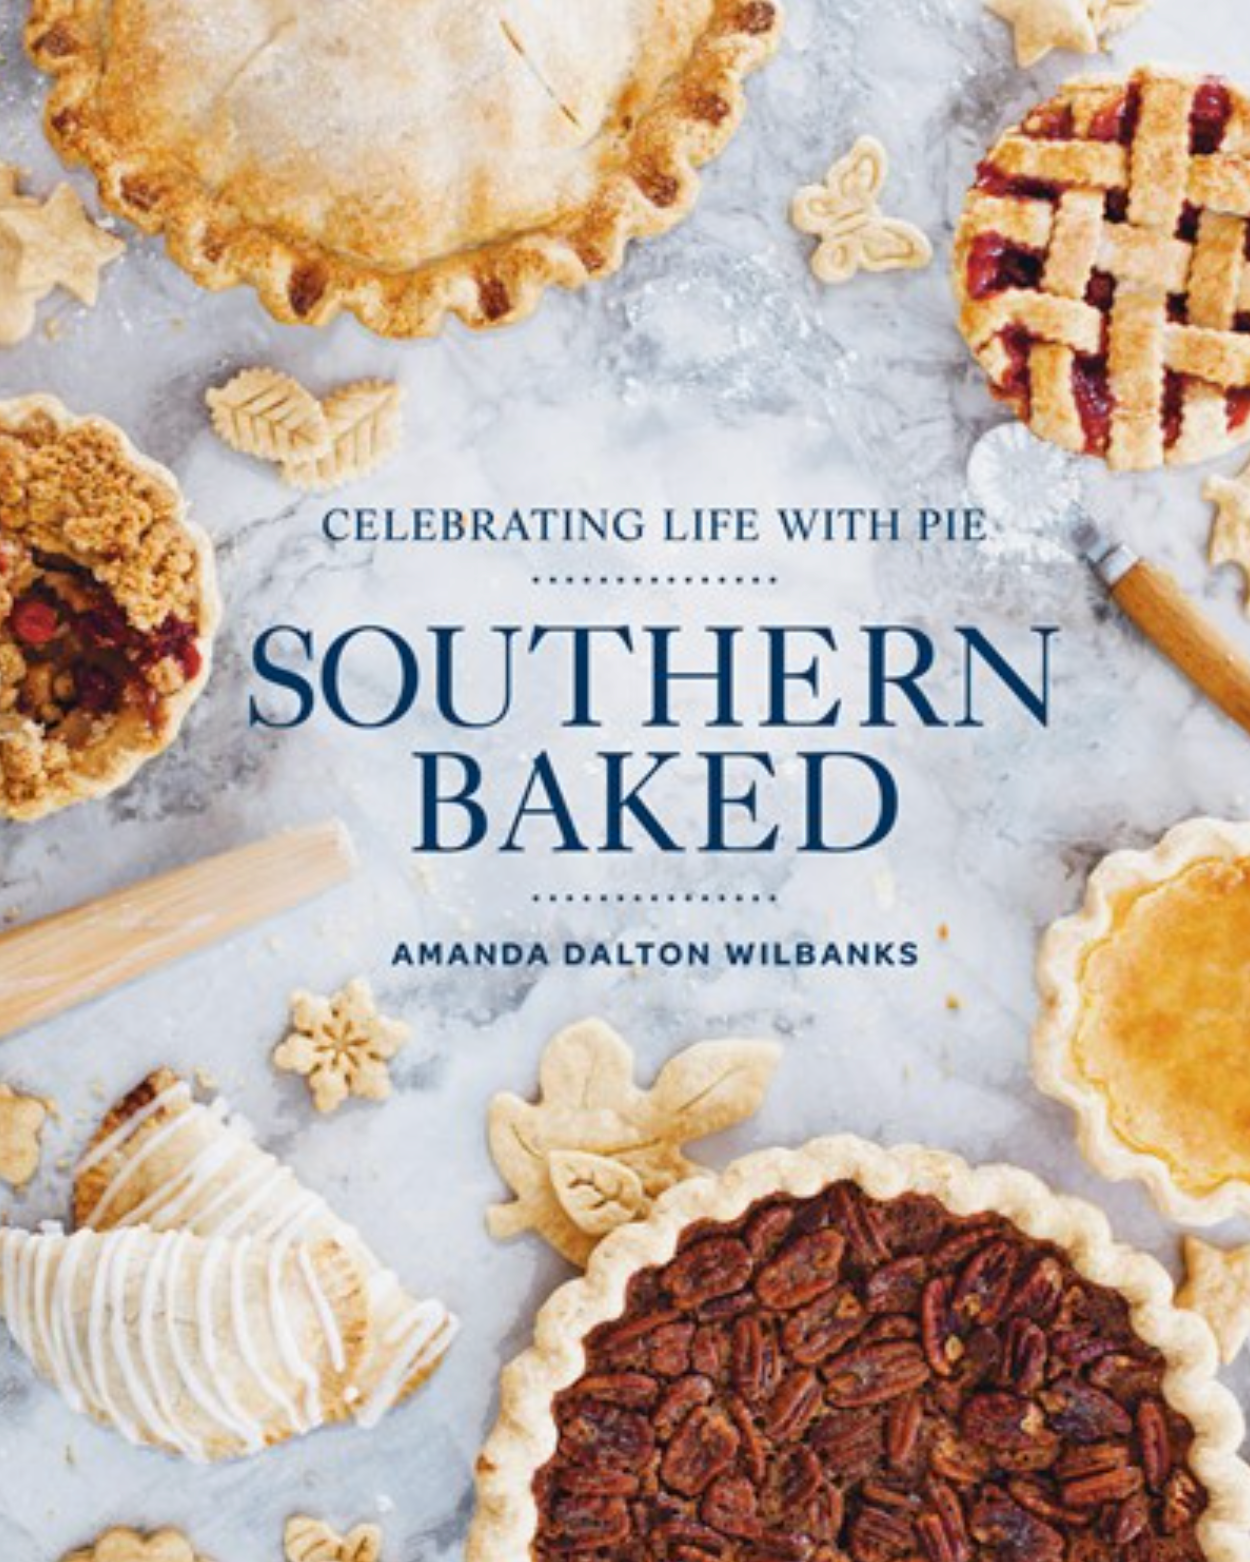 "Southern Baked: Celebrating Life with Pie" by Amanda Wilbanks